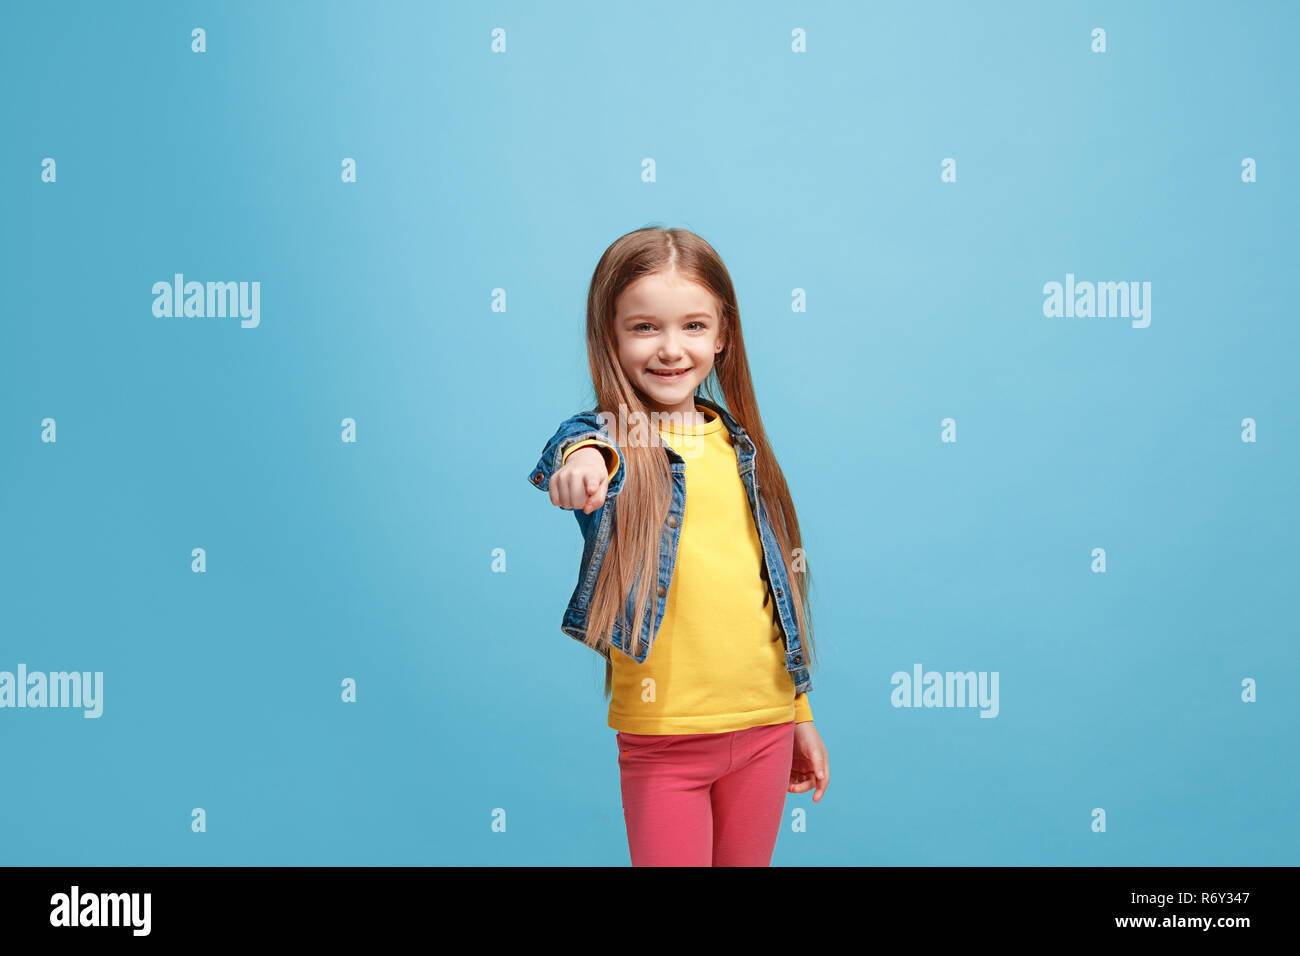 The happy teen girl pointing to you, half length closeup portrait on blue background. Stock Photo